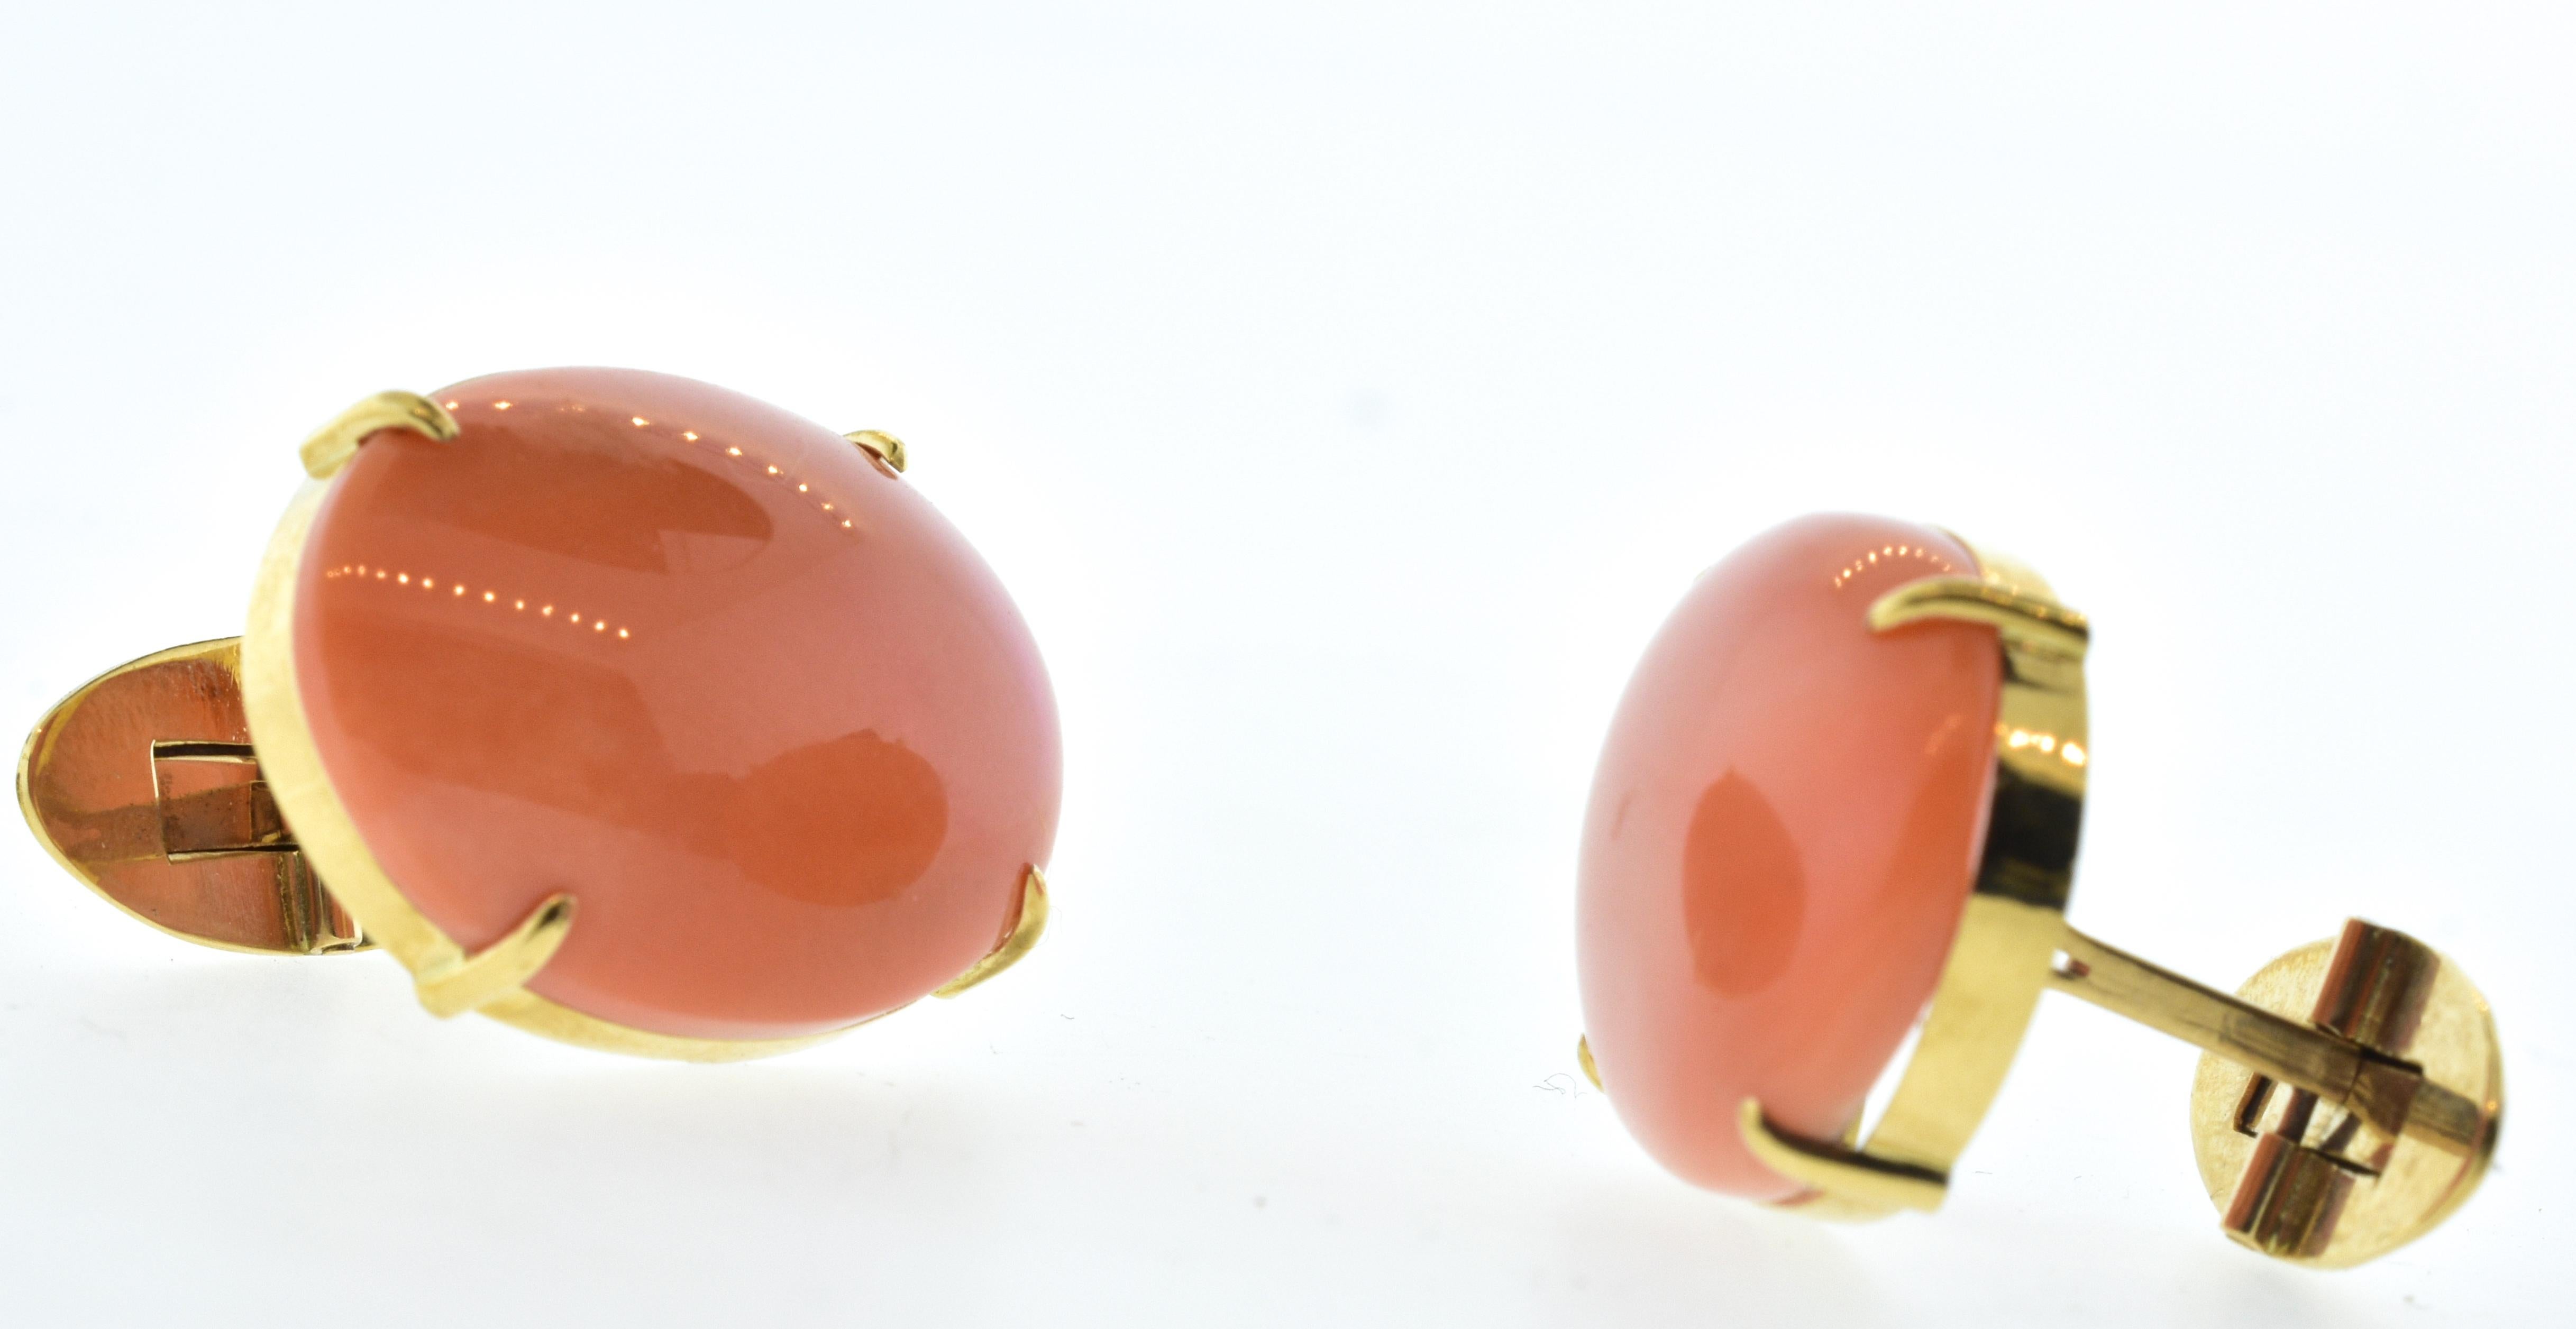 Antique cufflinks centering fine large natural coral.  The natural coral is an even fine tomato color and prong set in gold.  The back swivels in for ease when putting on.  The coral measures 1 inch in diameter.  These antique cufflinks are bold,